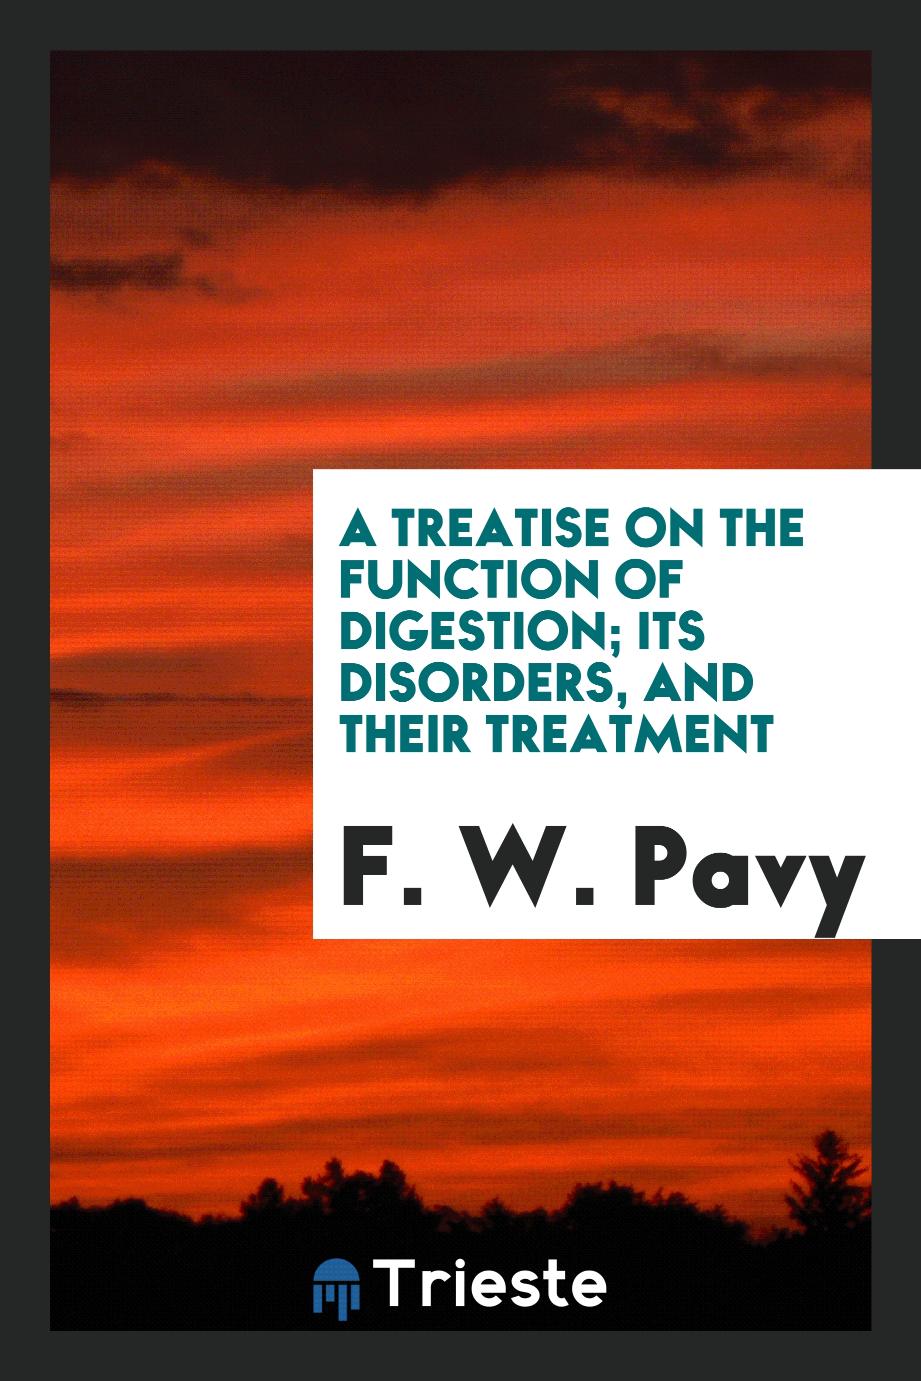 A Treatise on the Function of Digestion; Its Disorders, and their Treatment